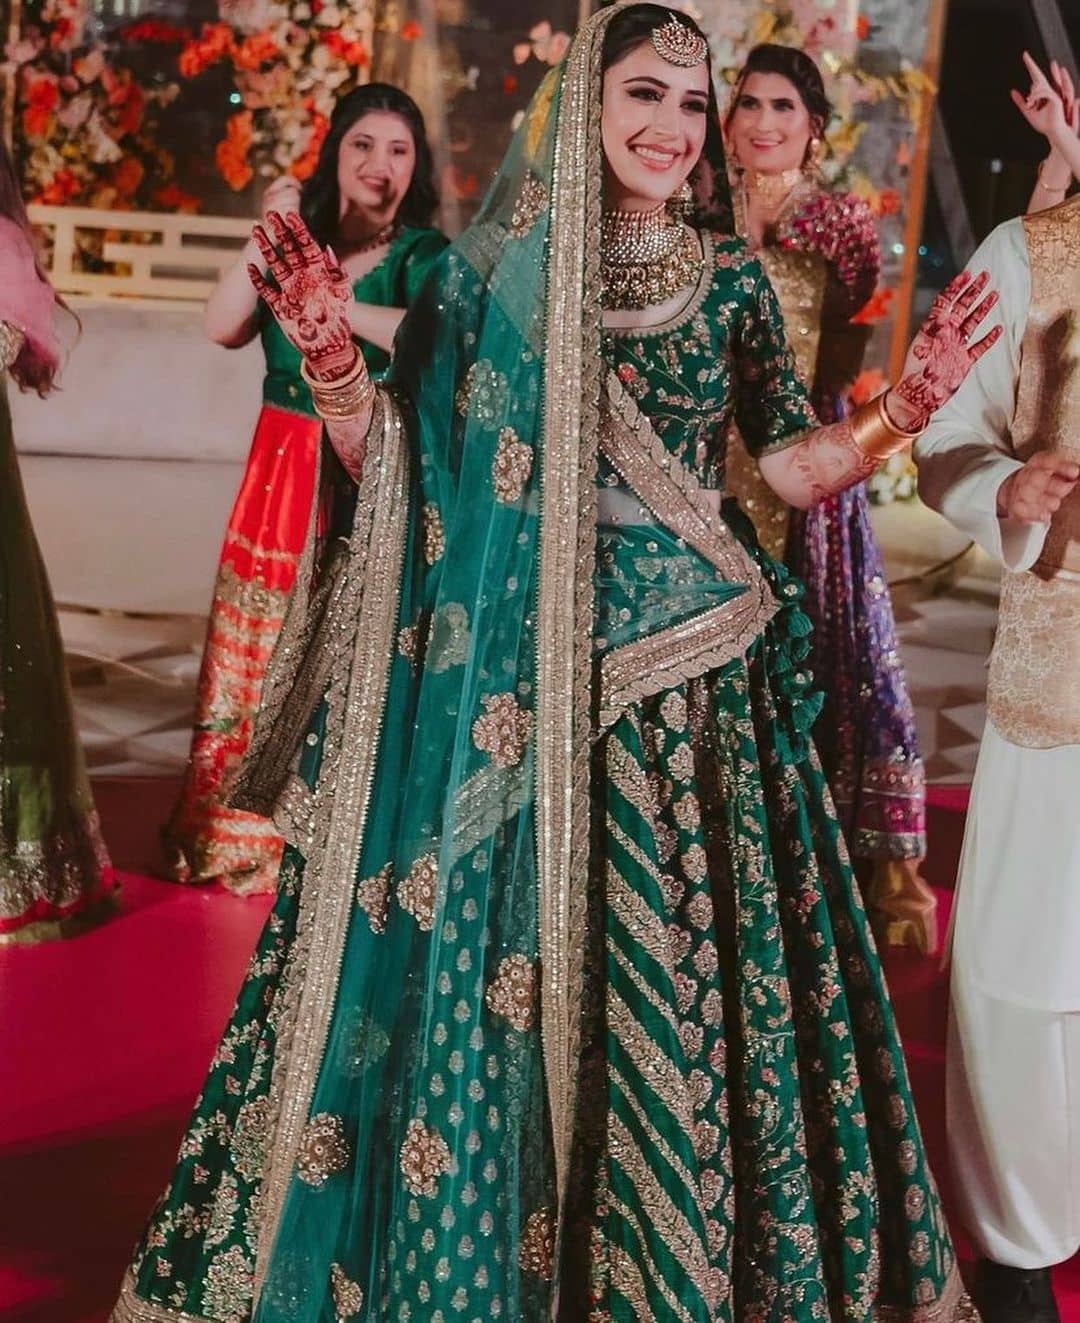 Discover more than 162 pink and green bridal lehenga best